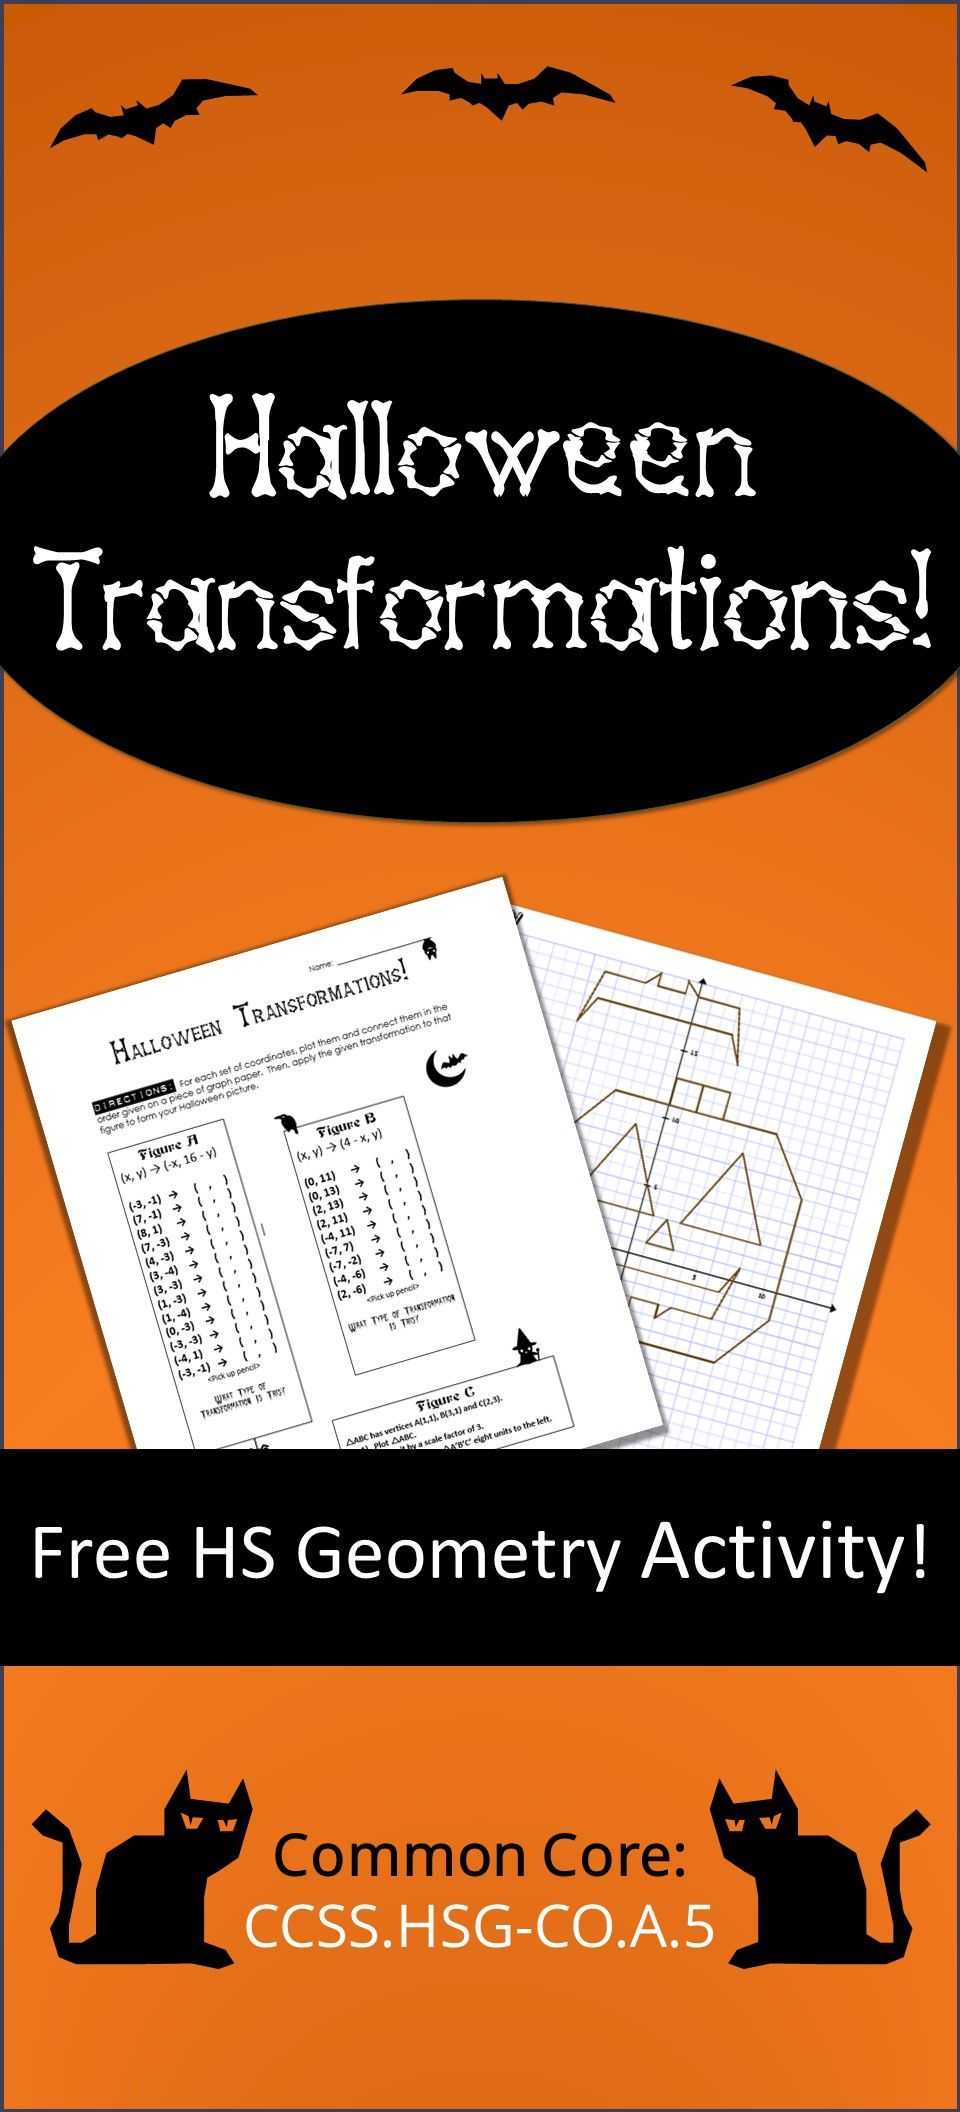 Special Right Triangles Worksheet Answers and Halloween Transformations Hs Geometry Activity – Aligned to Mon